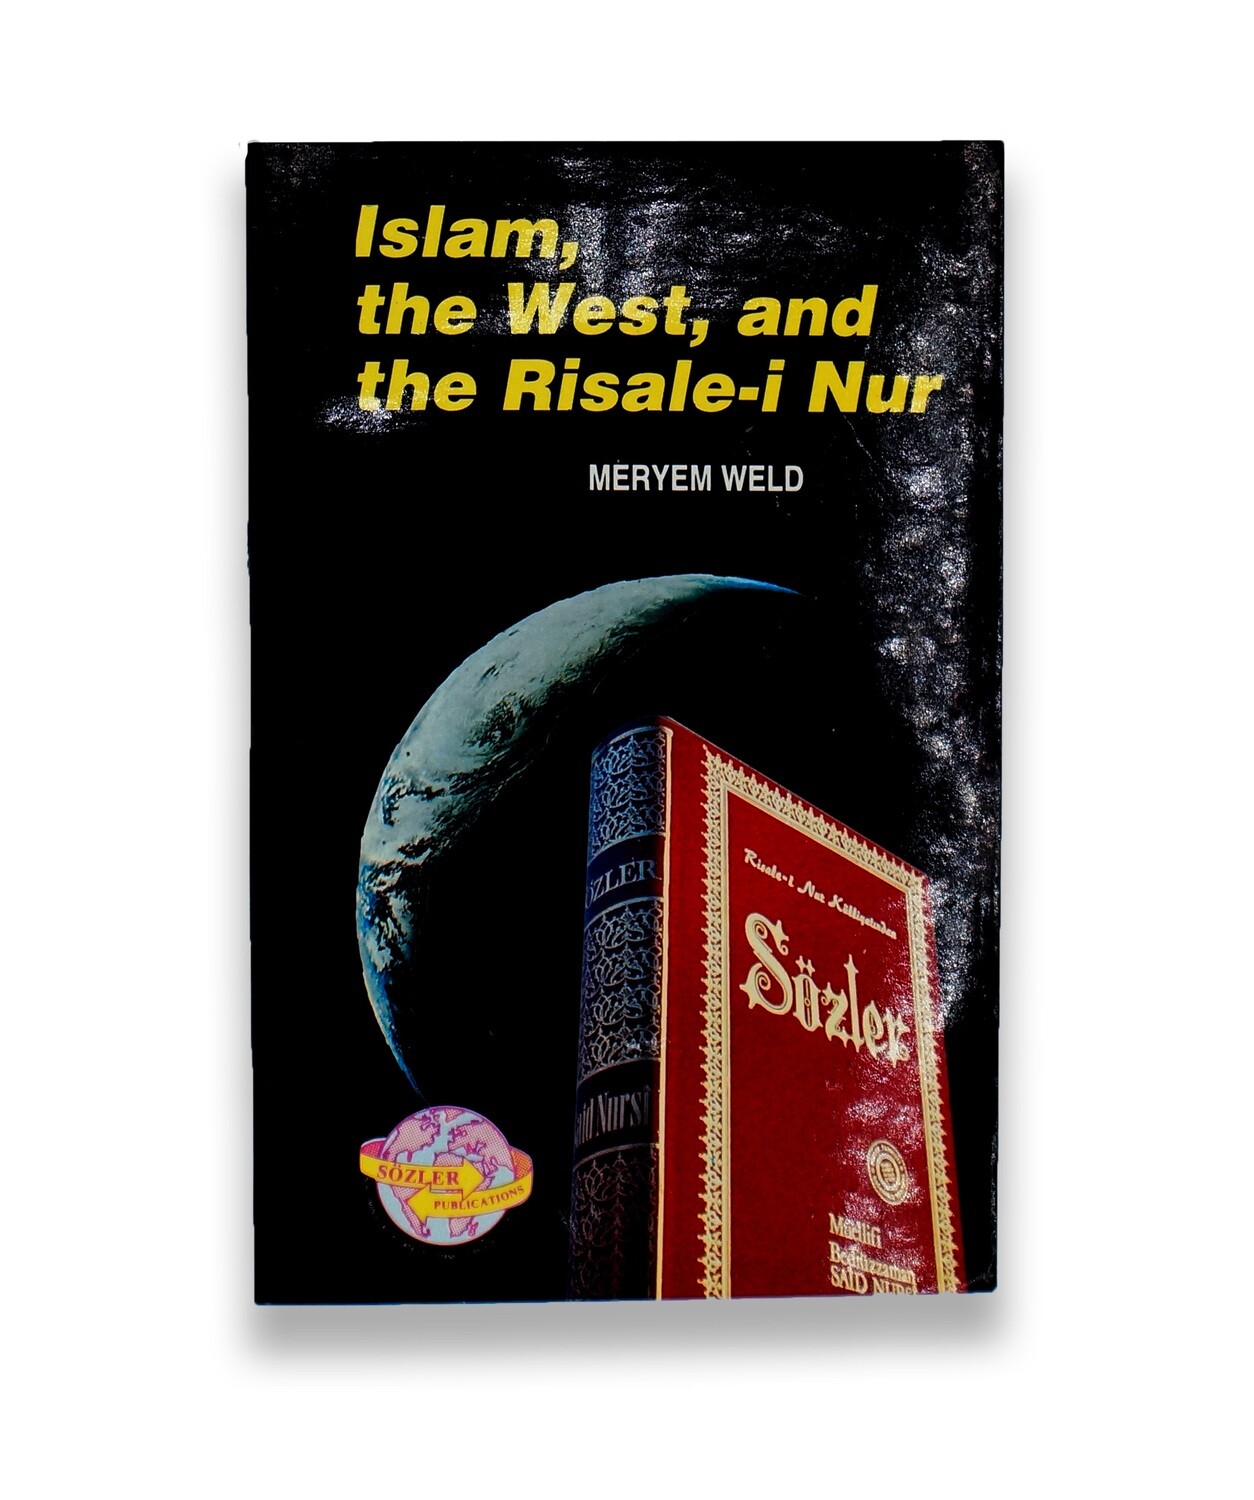 Islam, the West, and the Risale-i Nur